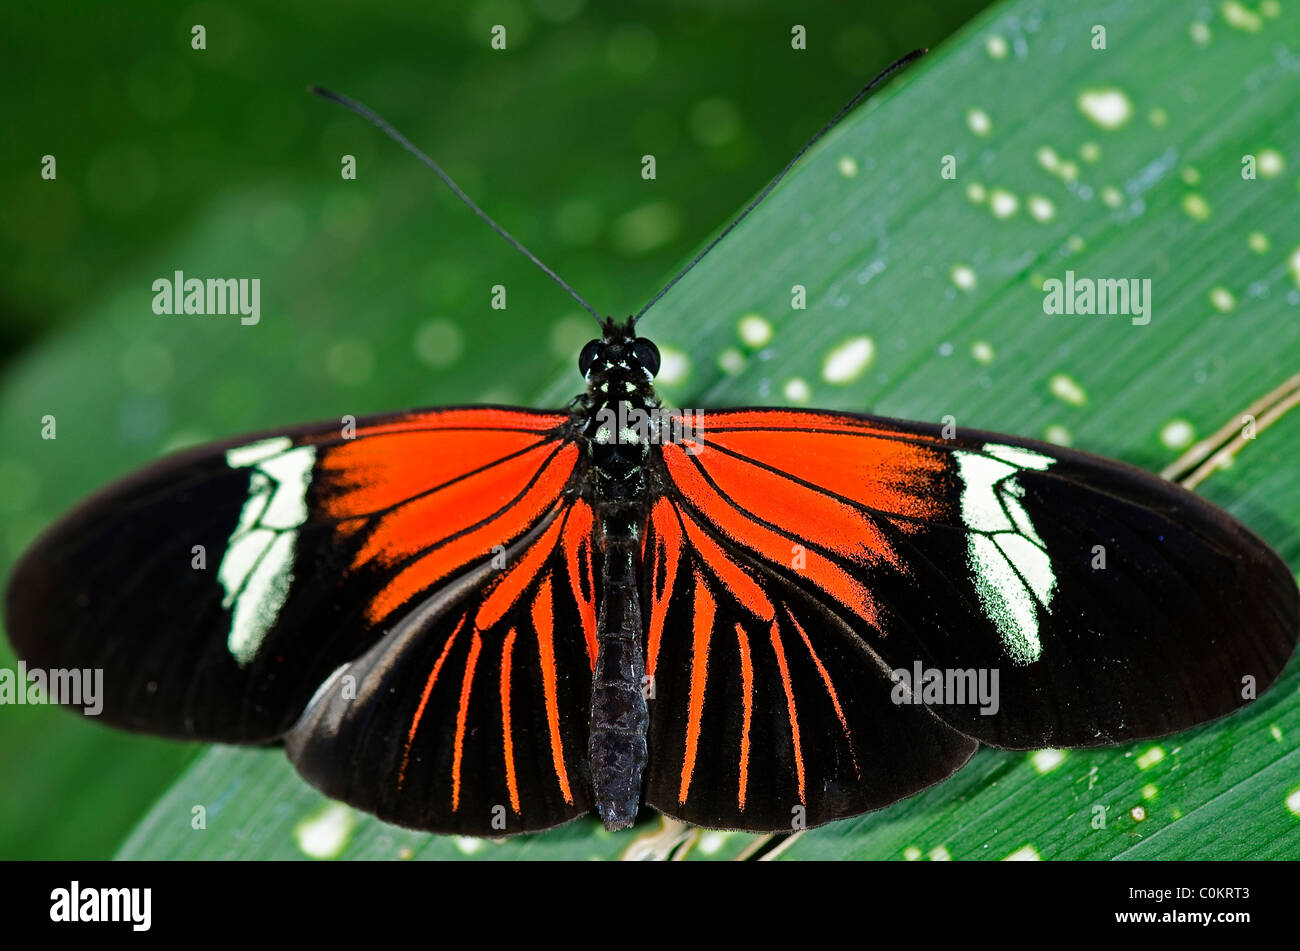 A Doris Longwing Butterfly, of the Nymphalidae family, native of the Amazon Basin through Mexico. Stock Photo